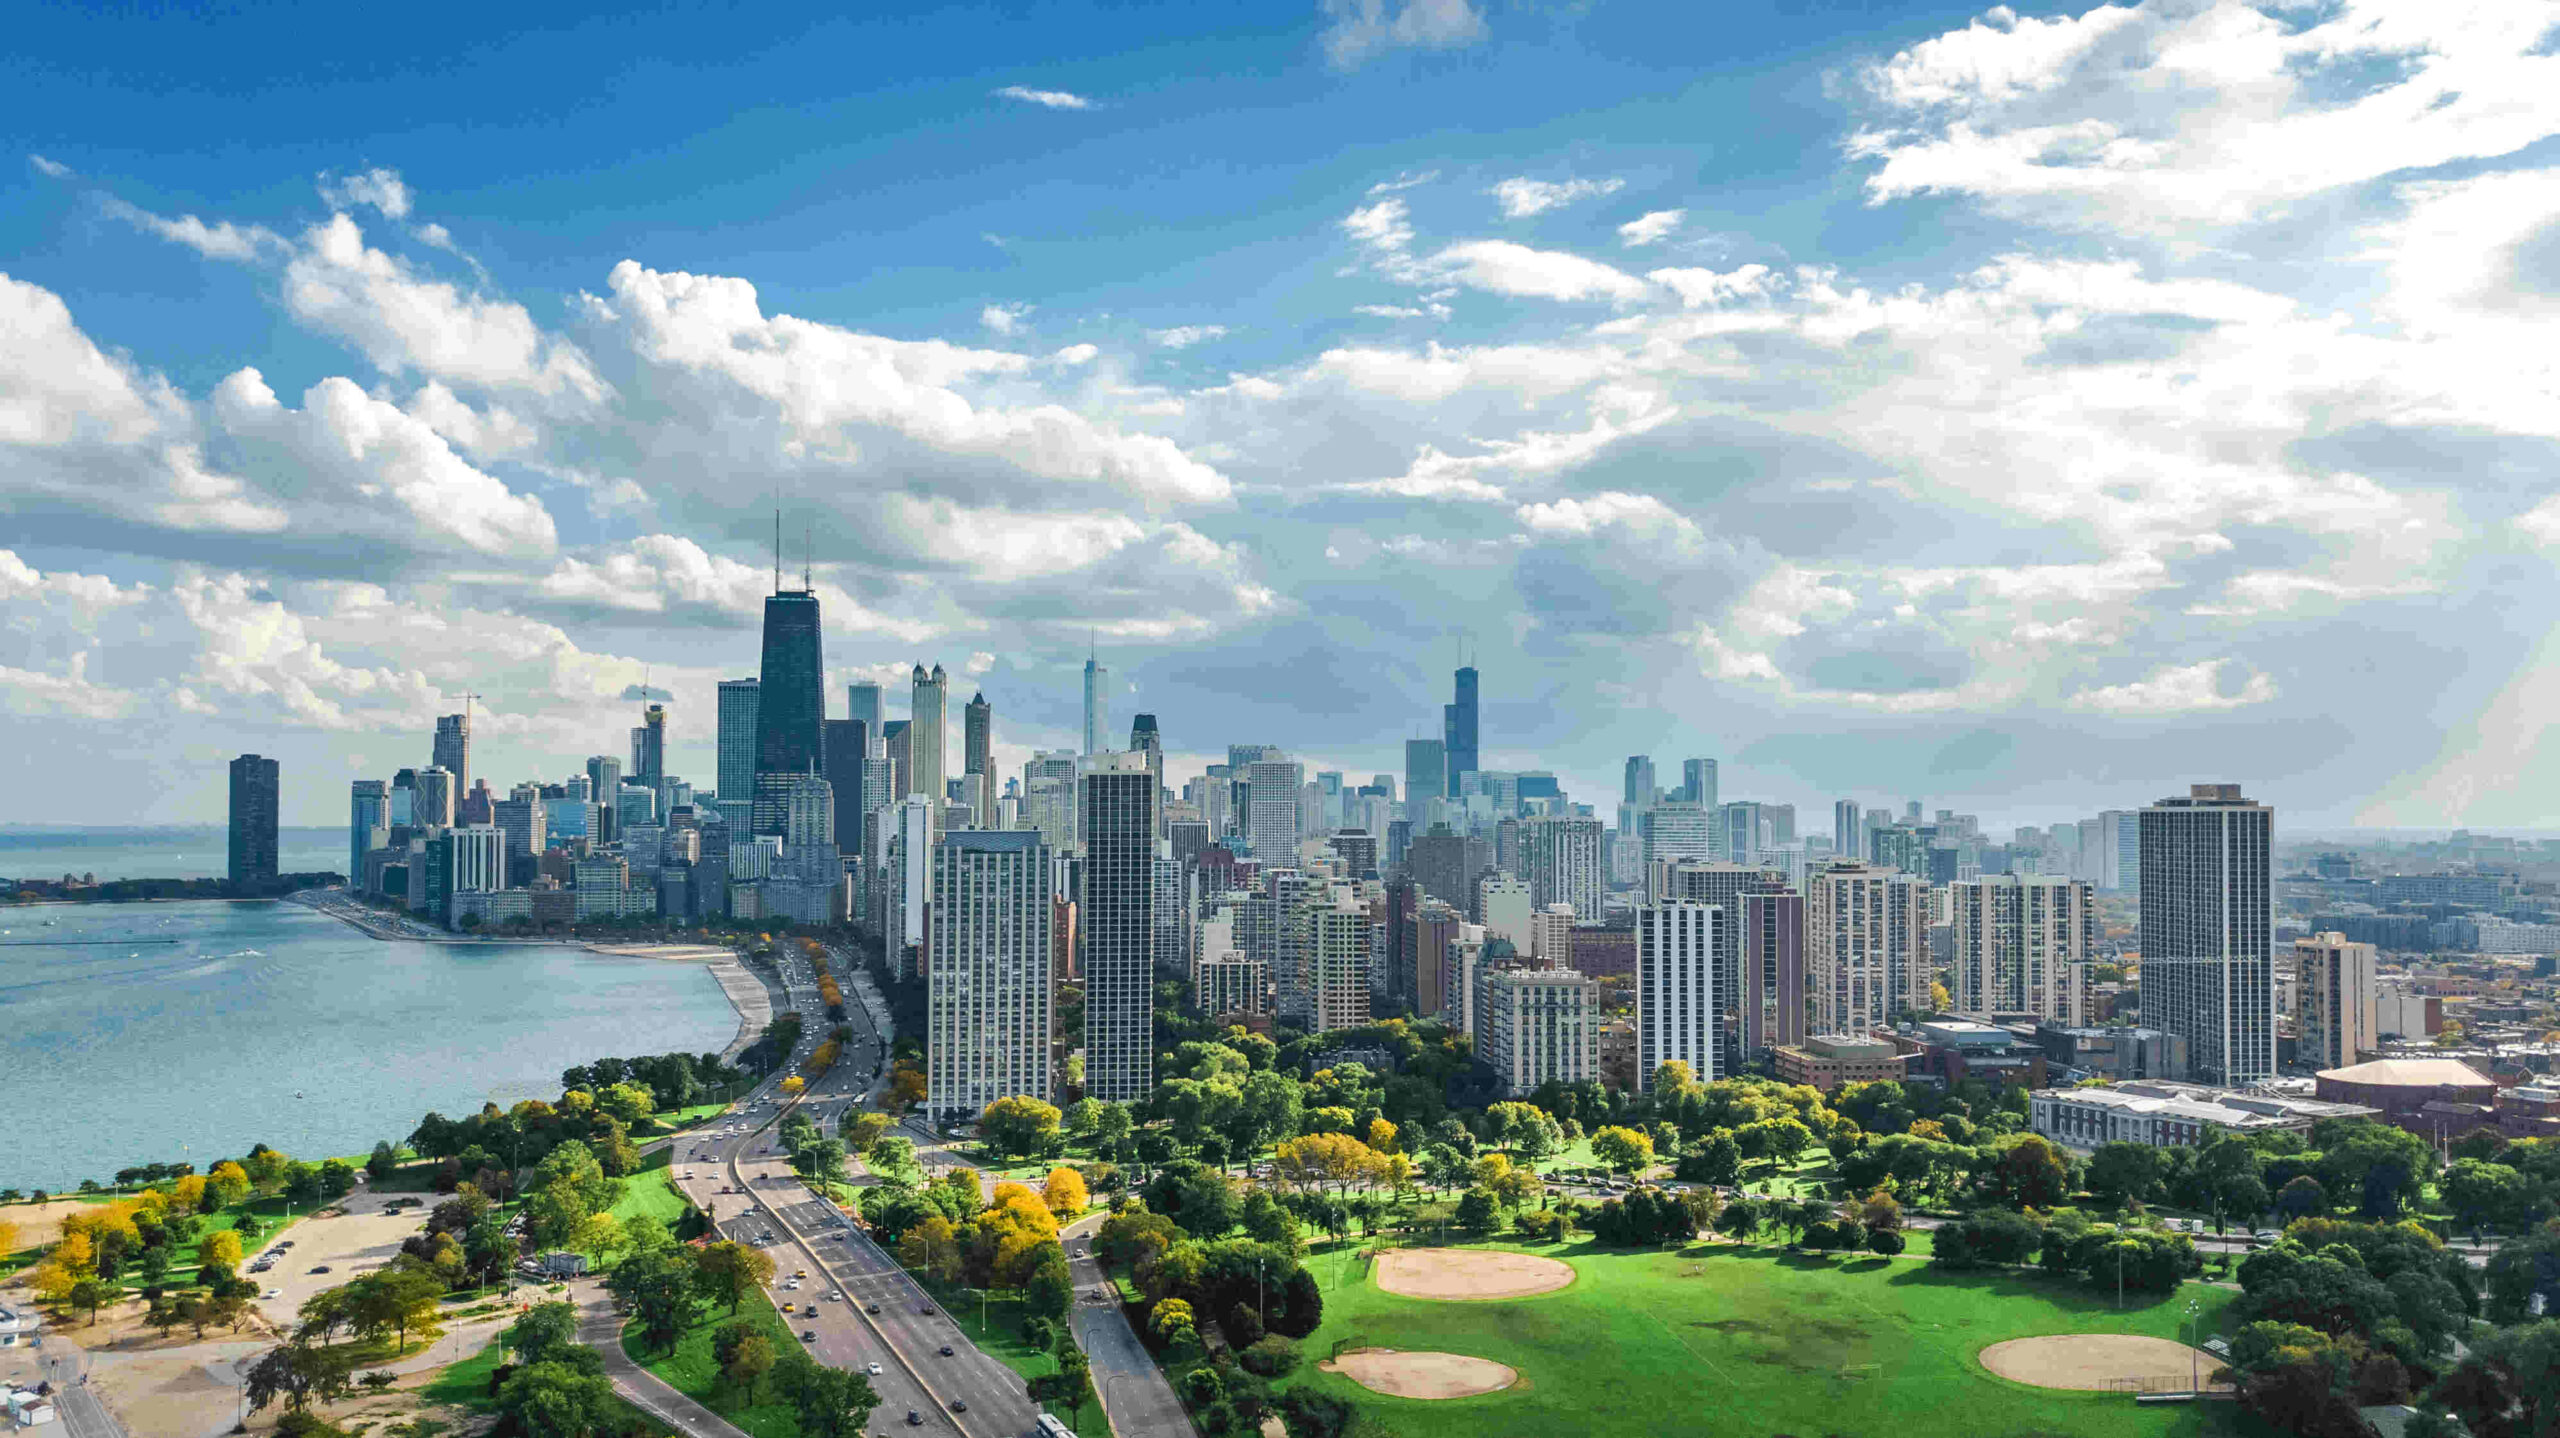 Image of sunny day in the city of Chicago in Illinois